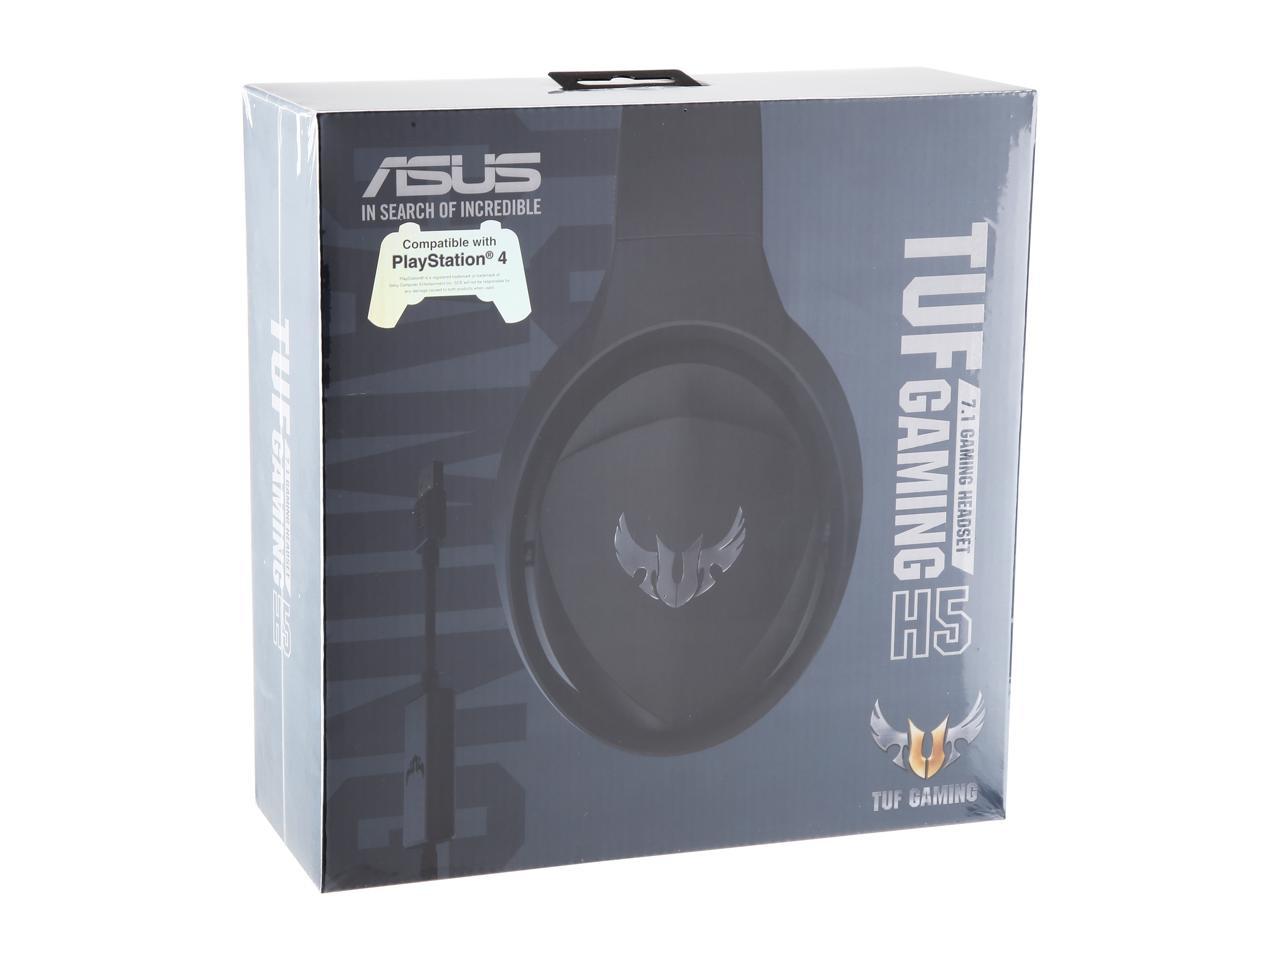 Passend gevaarlijk Belastingen ASUS TUF Gaming H5 Discord Certified Gaming Headset with Onboard 7.1  Virtual Surround Sound and Dual Microphones for PC, Playstation 4, Nintendo  Switch, Xbox One and Mobile Devices - Newegg.com